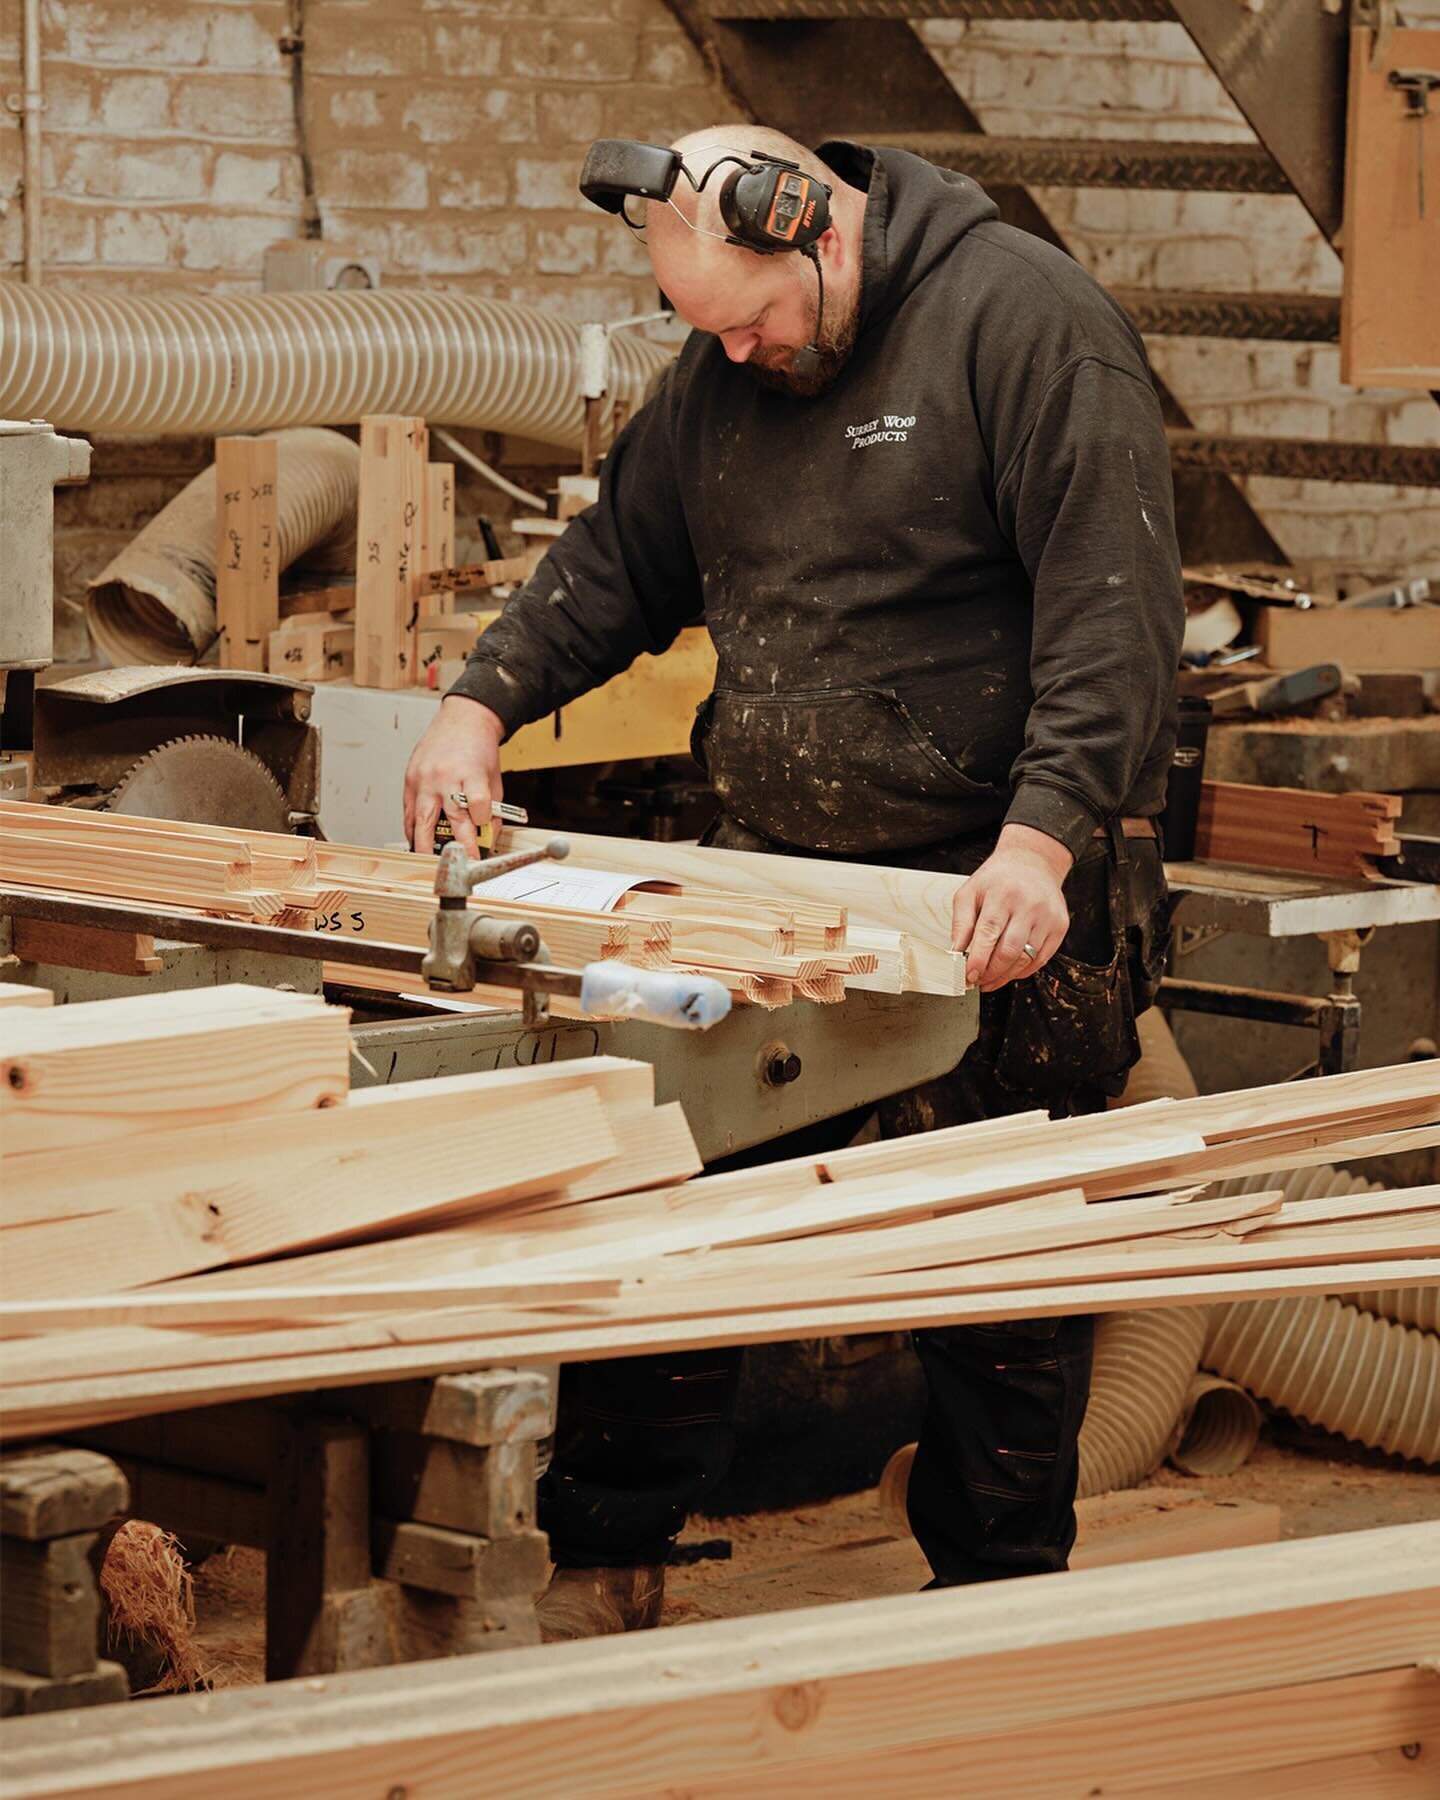 A snap shot of our workshop team,  creating wonders one piece at a time 🪚

#surrey #woodwork #sustainablymade #windows #doors #bespoke